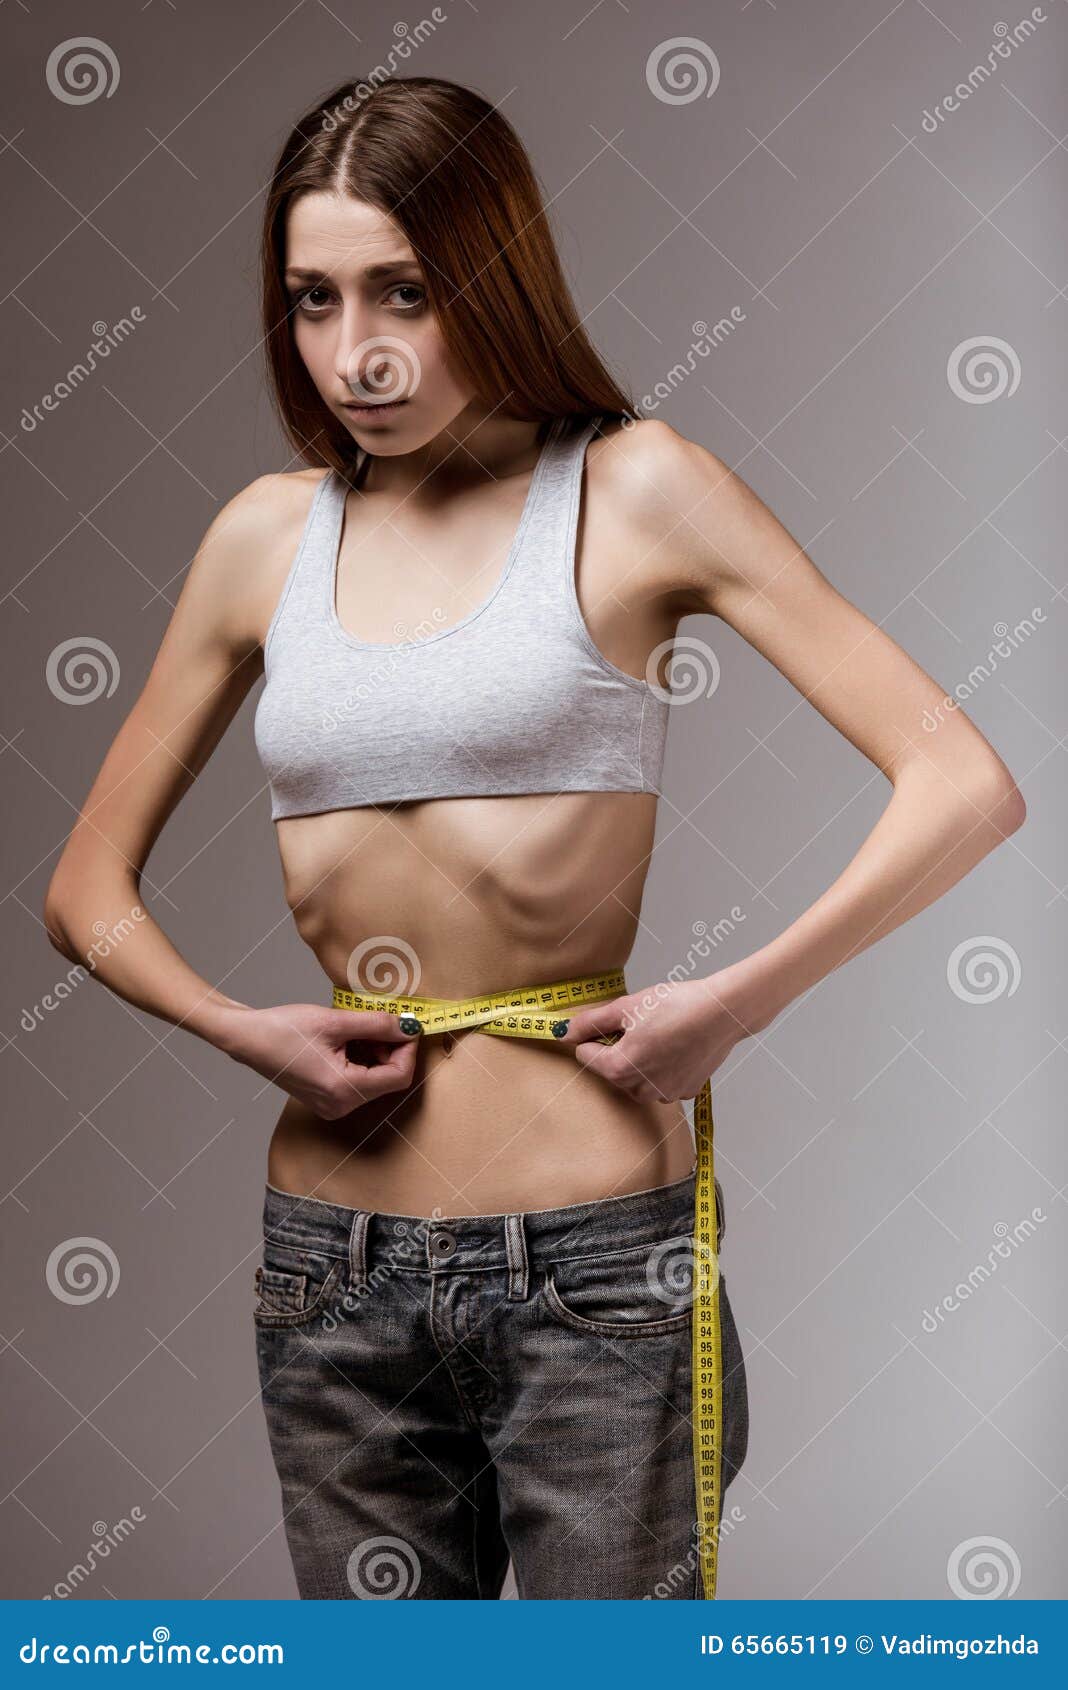 Very thin girl stock image. Image of adult, figure, fitness - 65665119